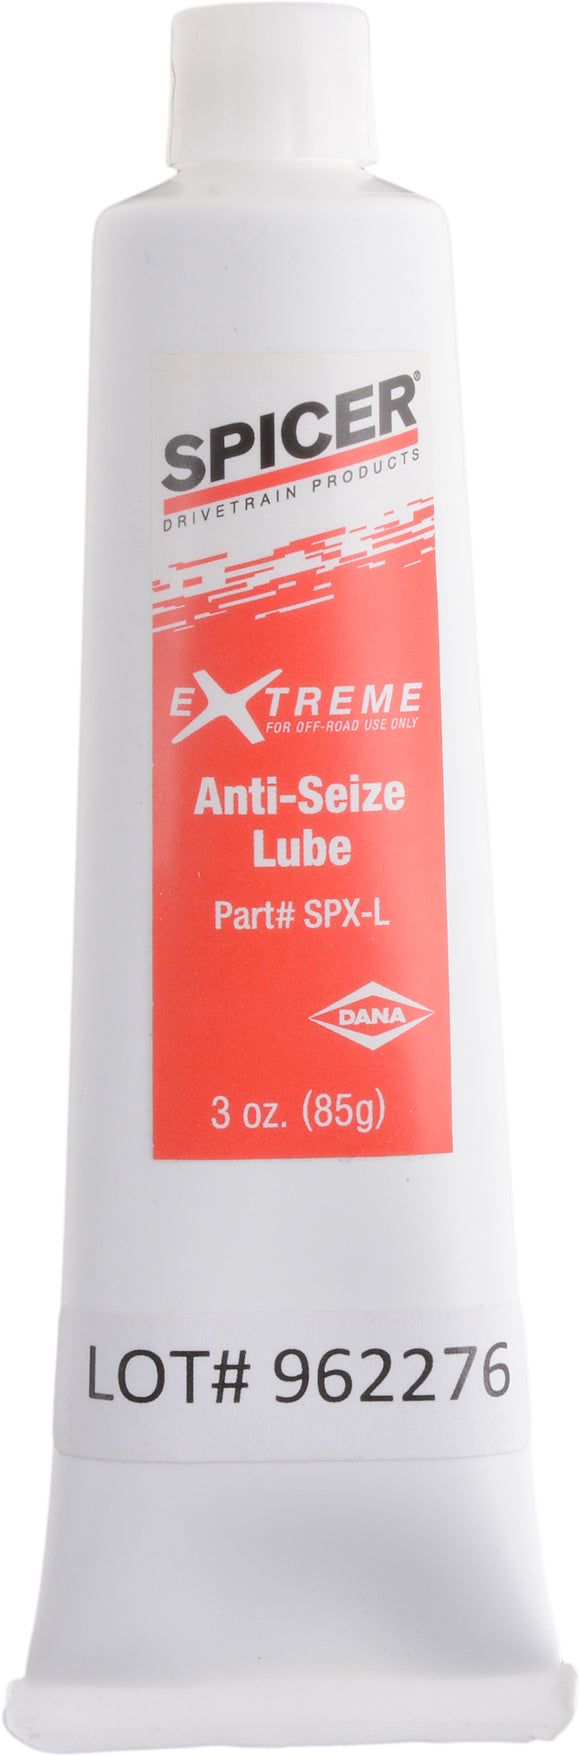 Anti-Seize Lube / Grease For Spicer Extreme U-Joints